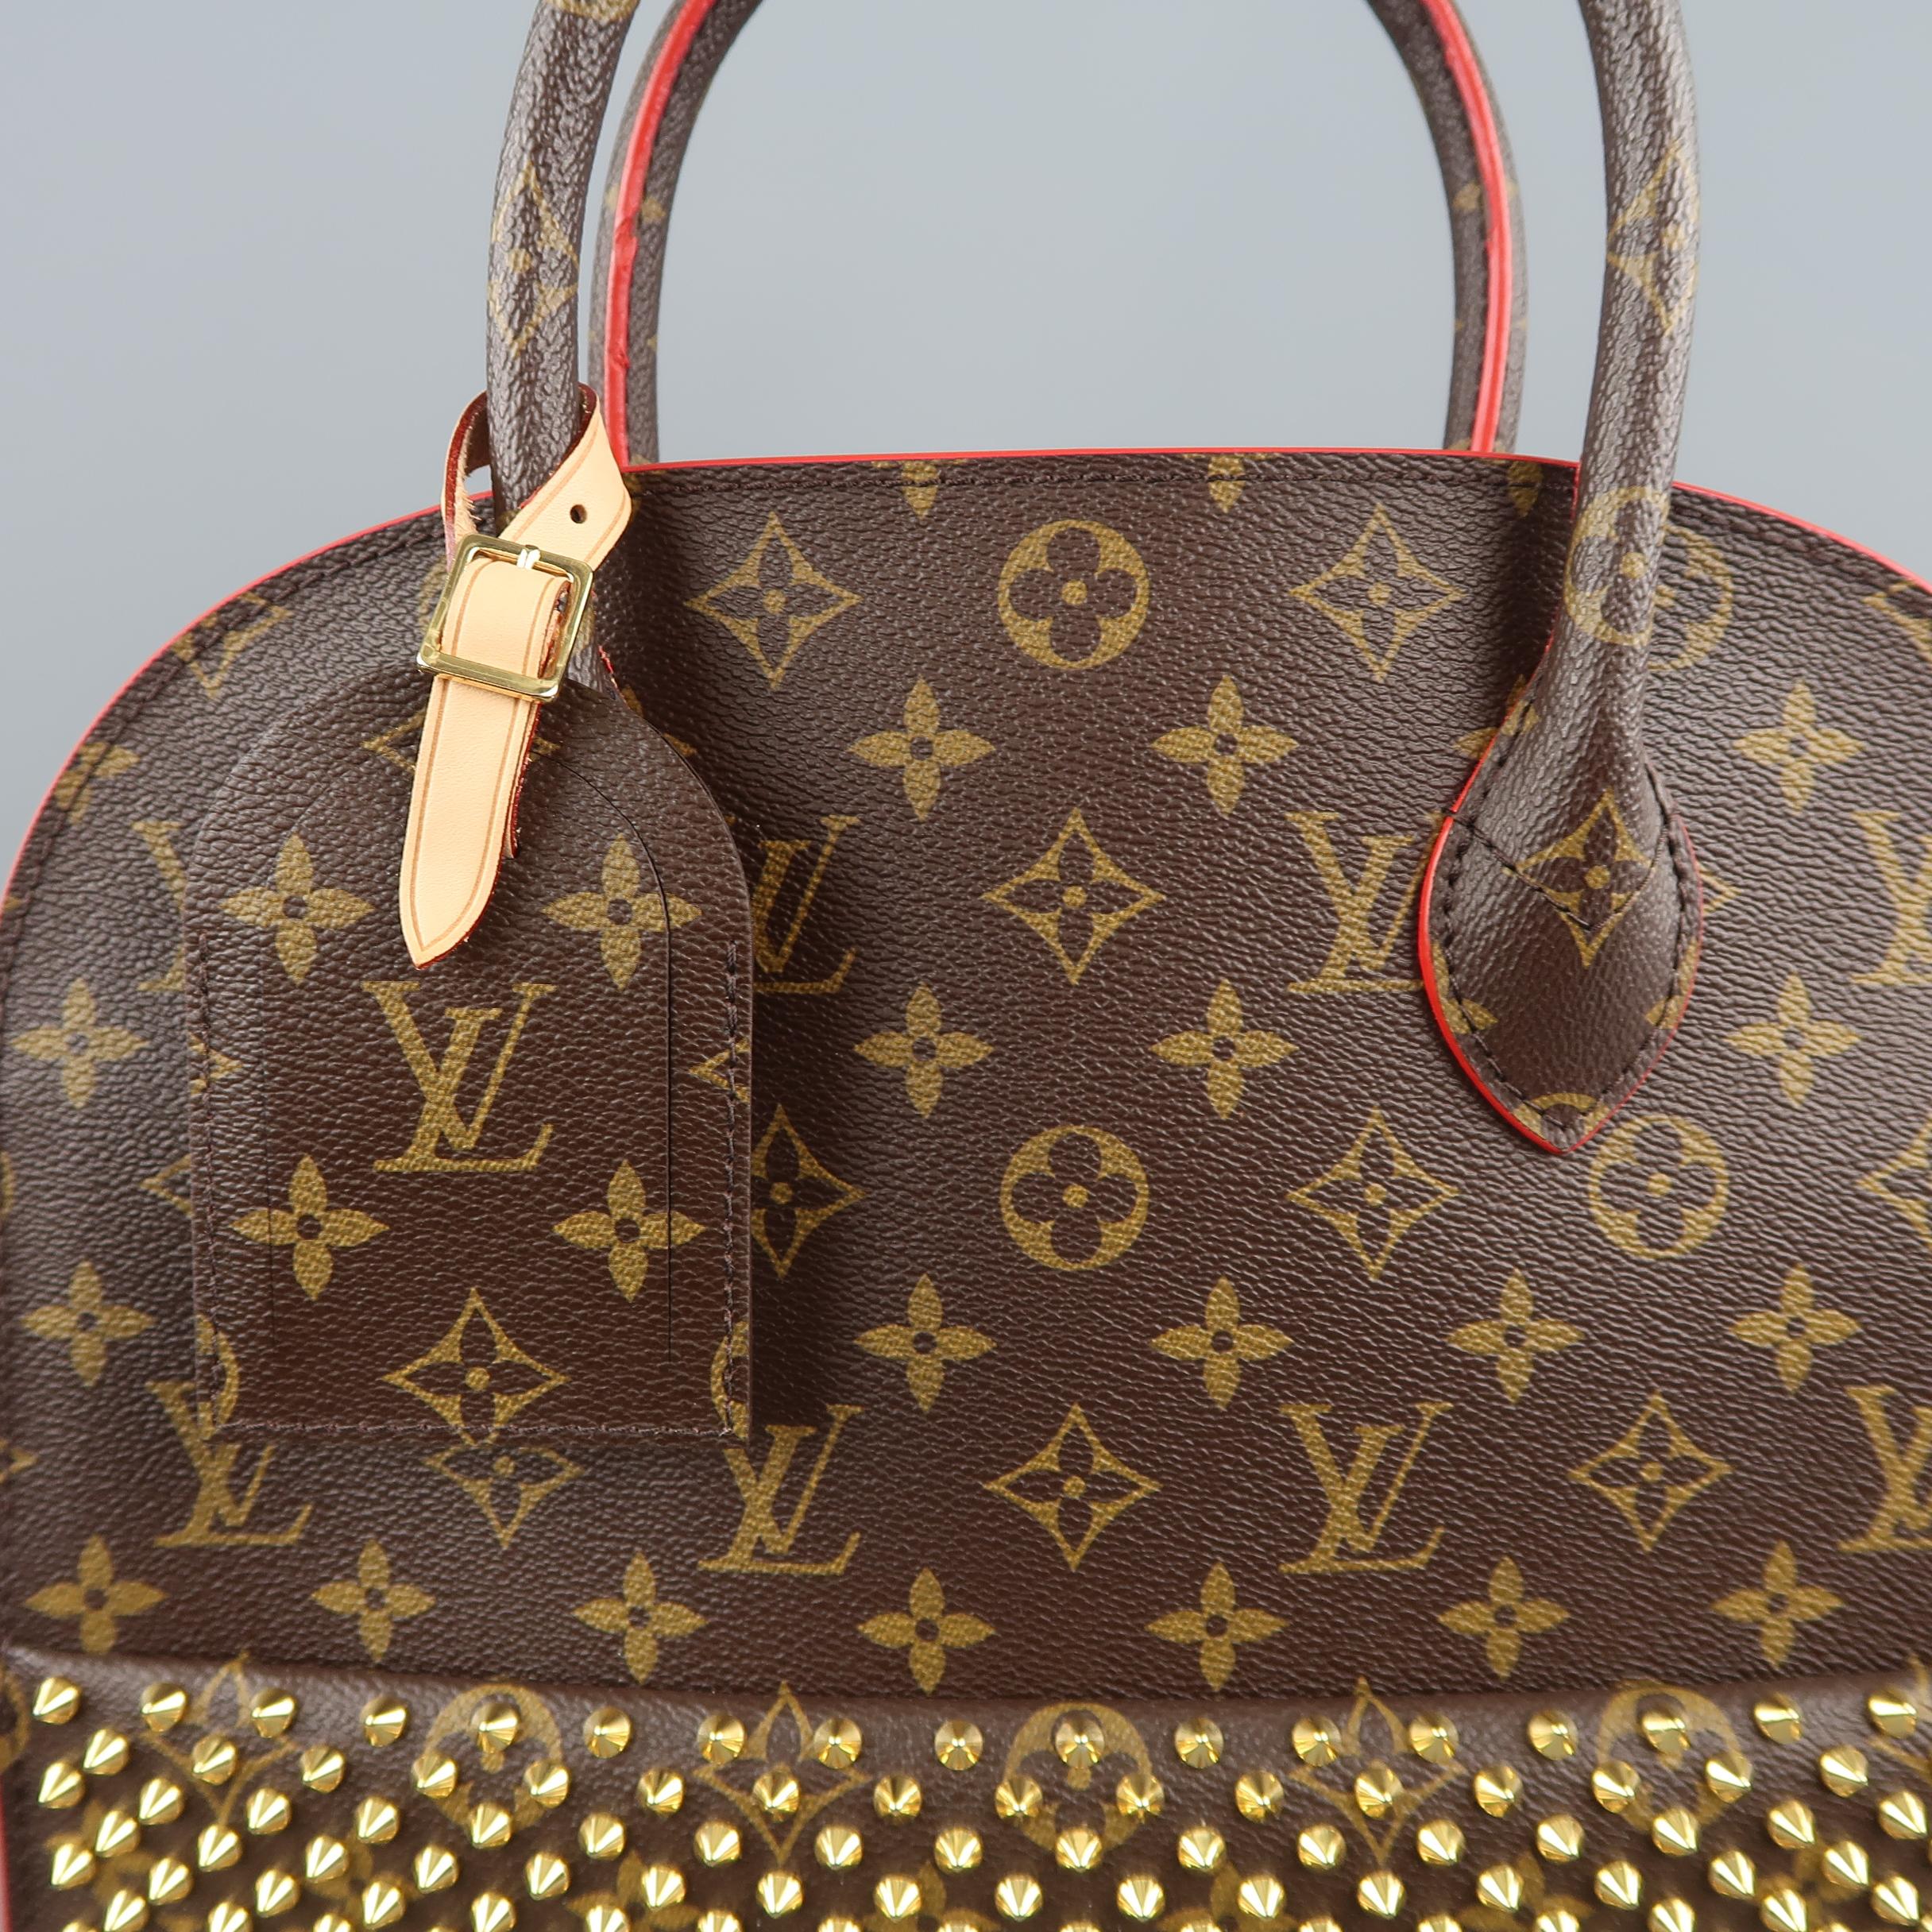 Sold at Auction: LOUIS VUITTON X CHRISTIAN LOUBOUTIN exklusive